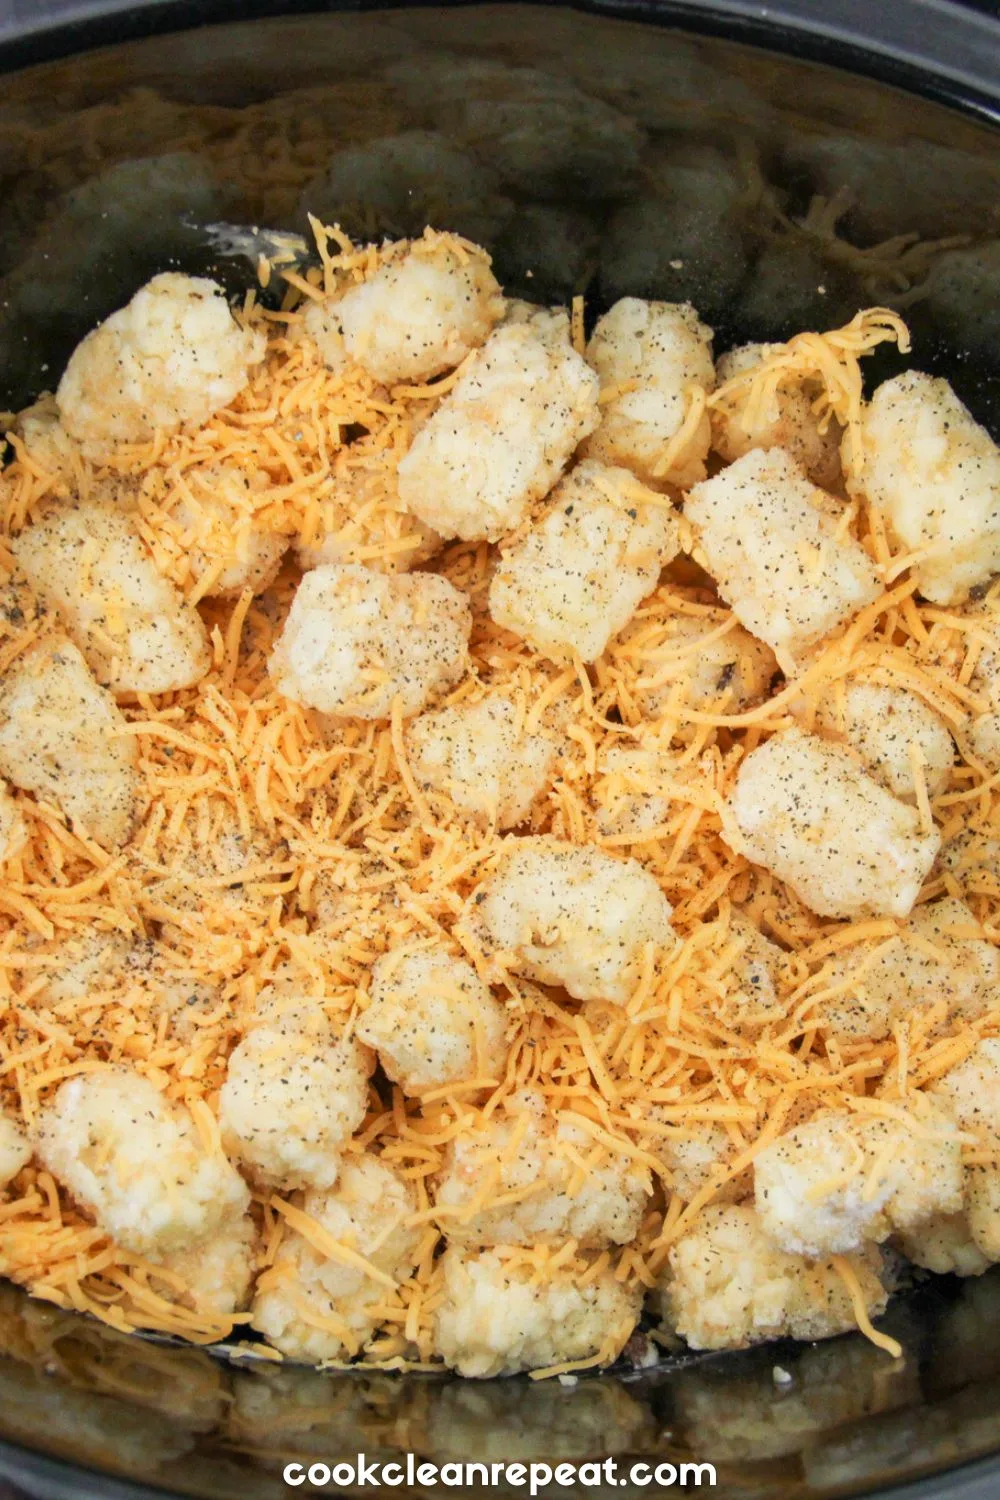 tater tots and shredded cheese added to crockpot